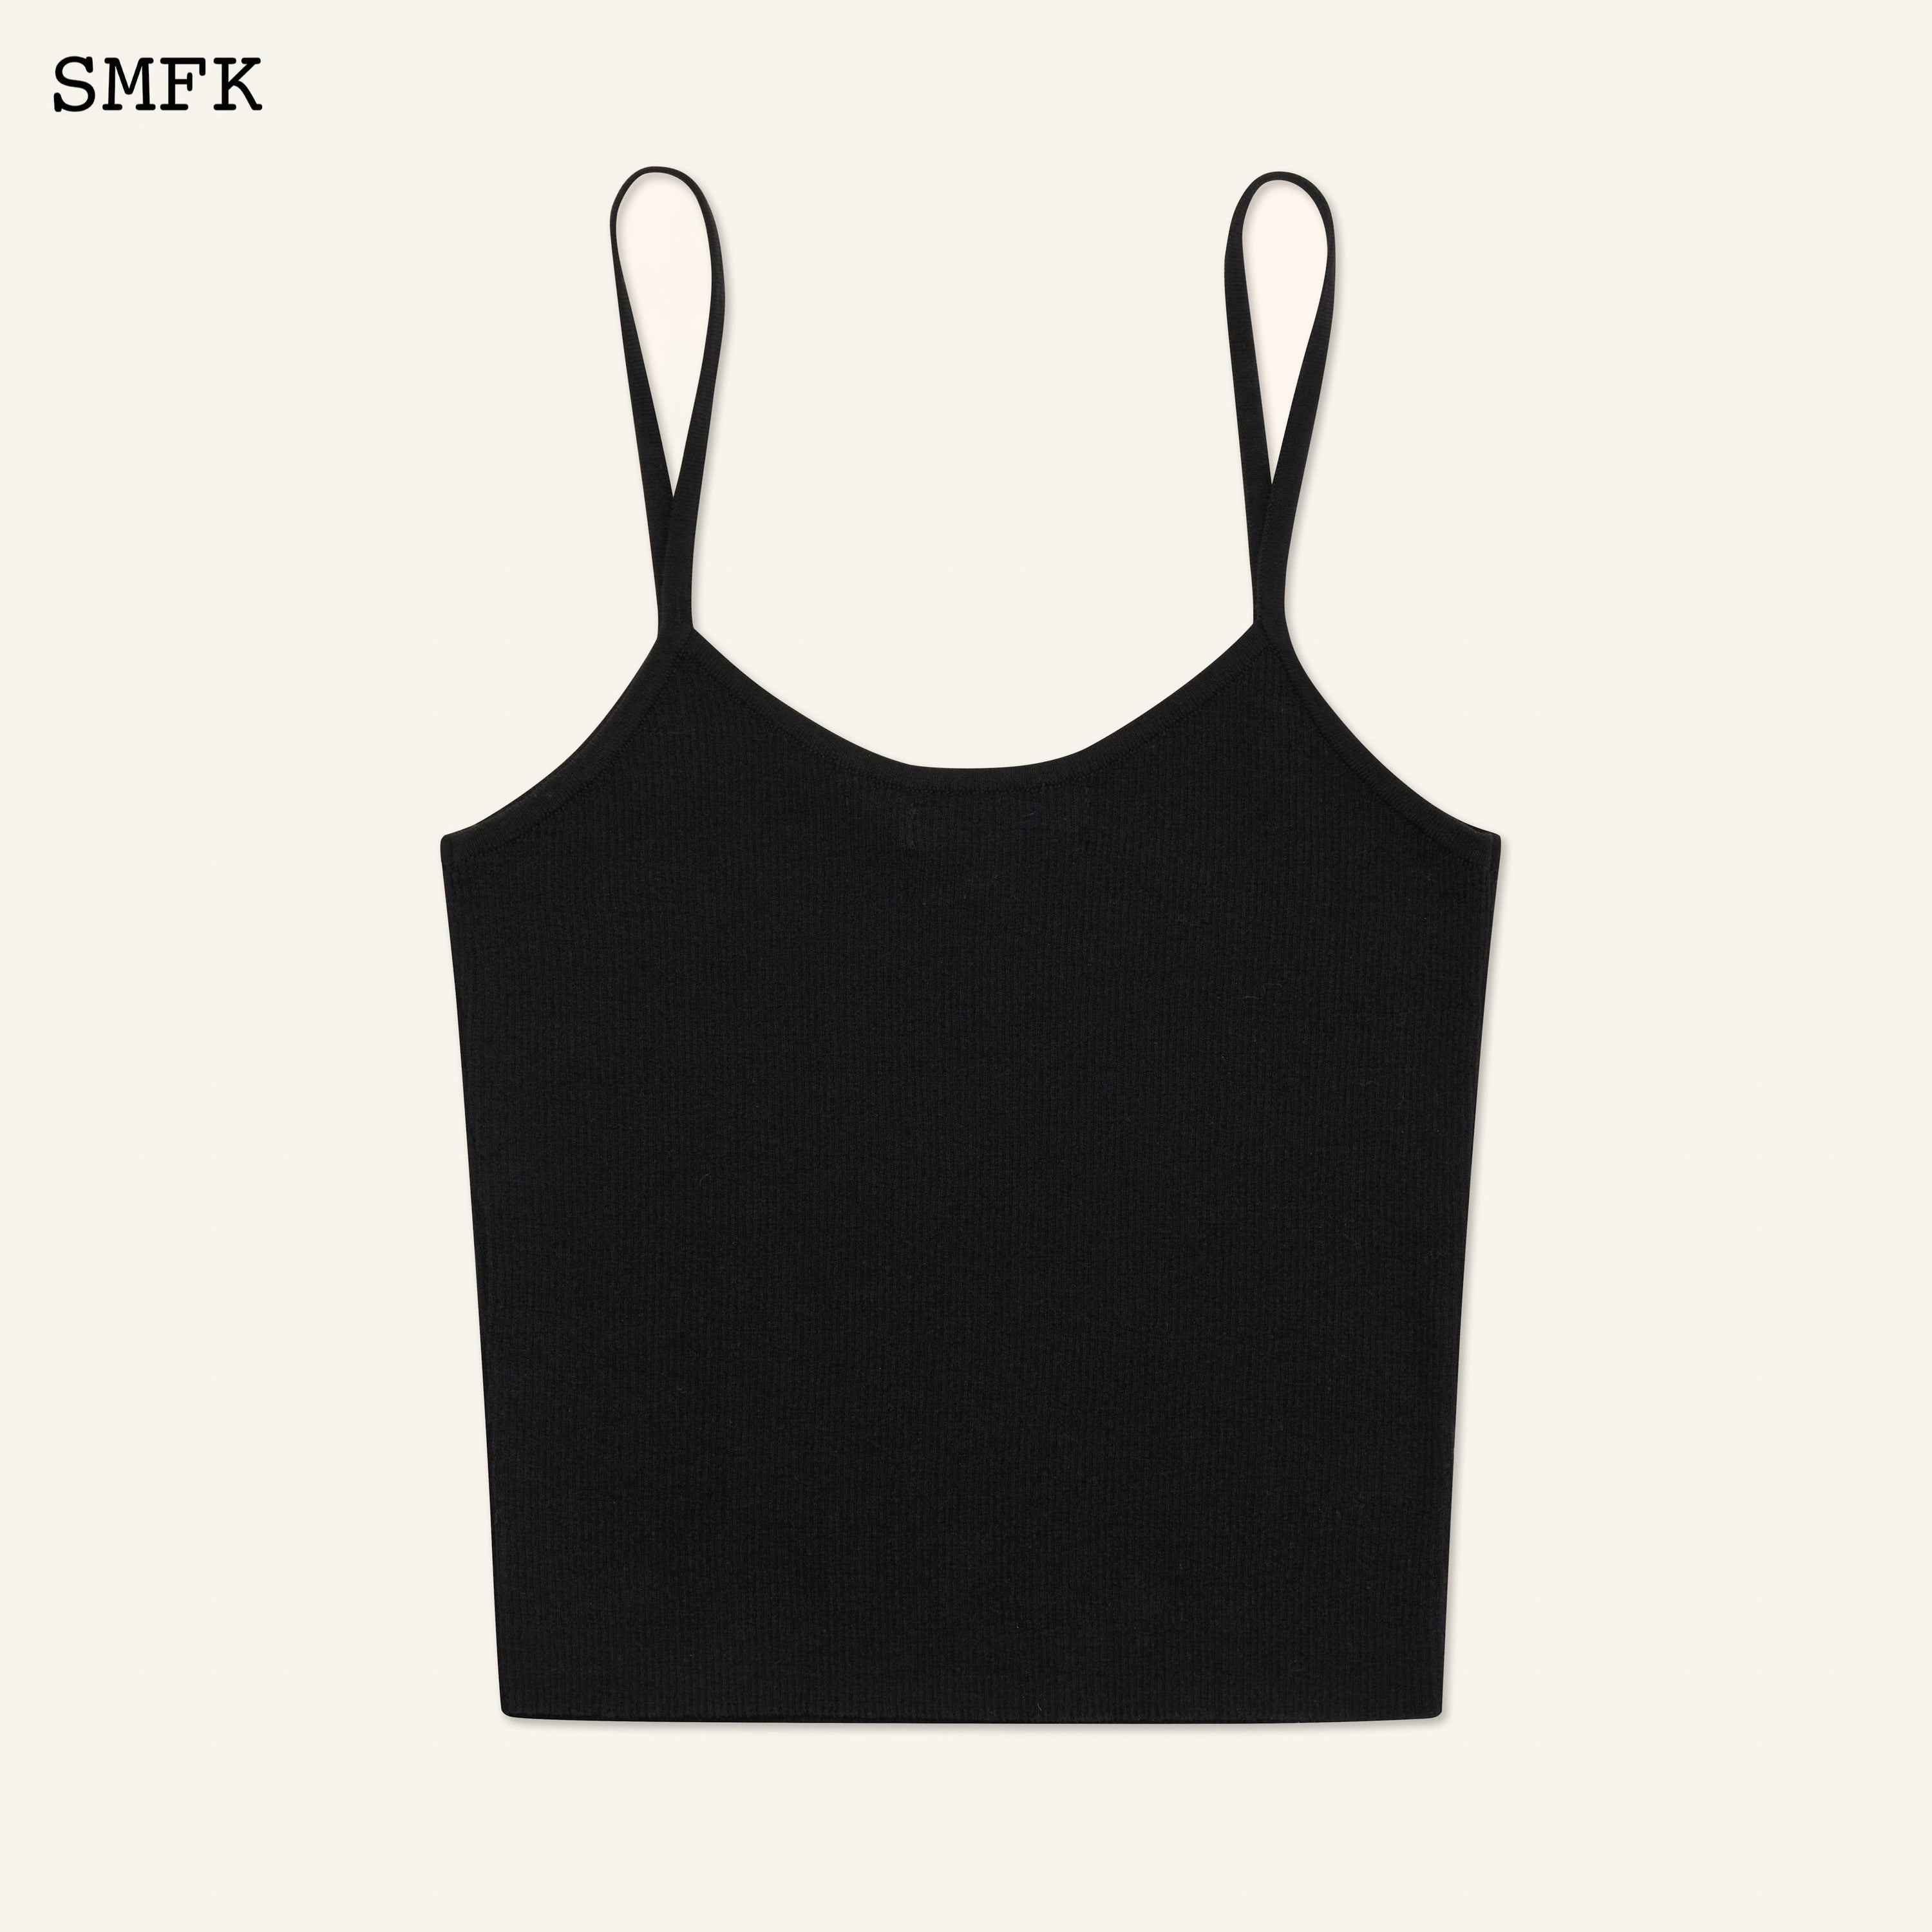 Compass Cross Classic Knitted Vest Top Black - SMFK Official